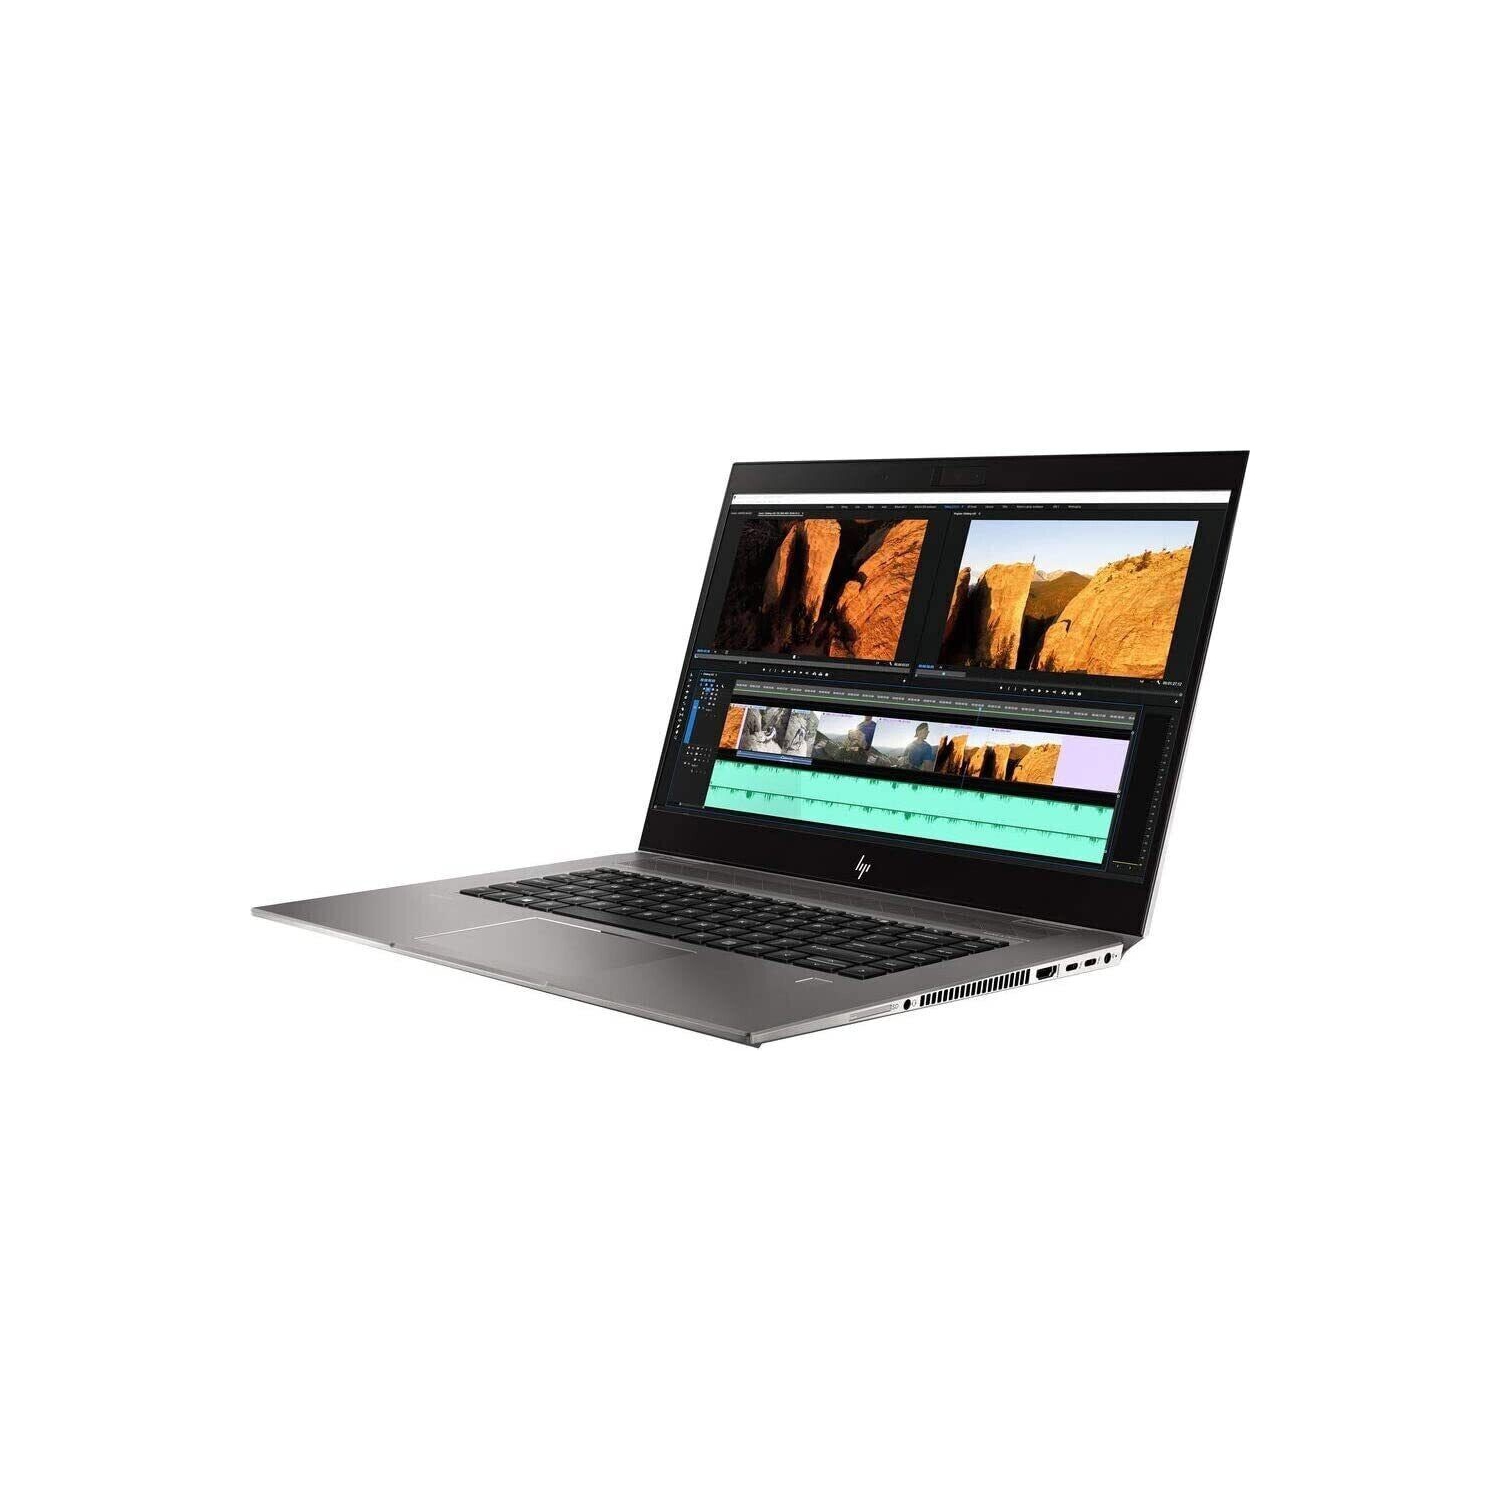 Refurbished (Excellent) HP ZBook 15 G5 Intel Core i7-8750H 2.2GHz/16GB/480GB SSD/WC- Win 10 Pro - Business Laptop